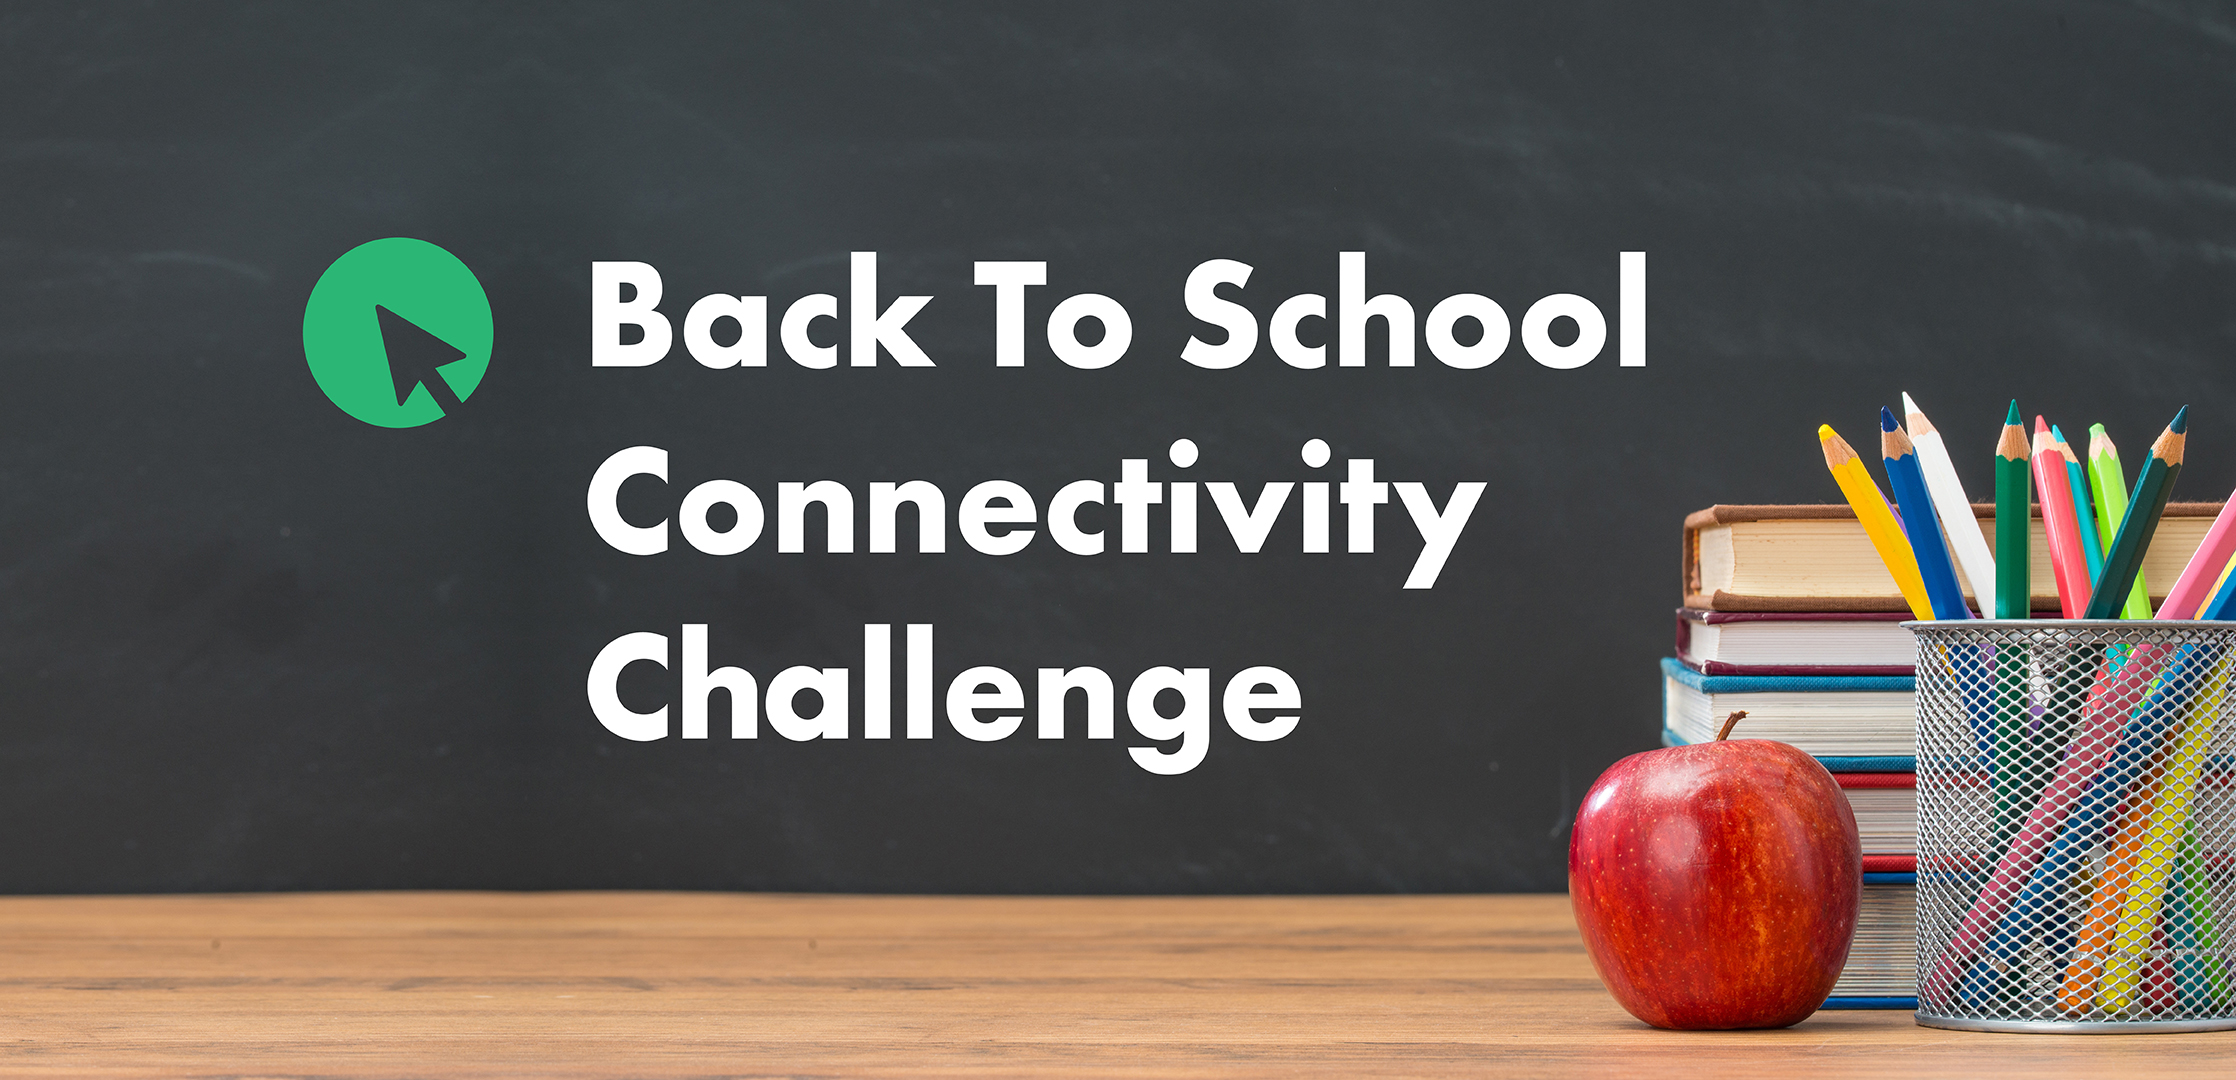 Back to School Connectivity Challenge